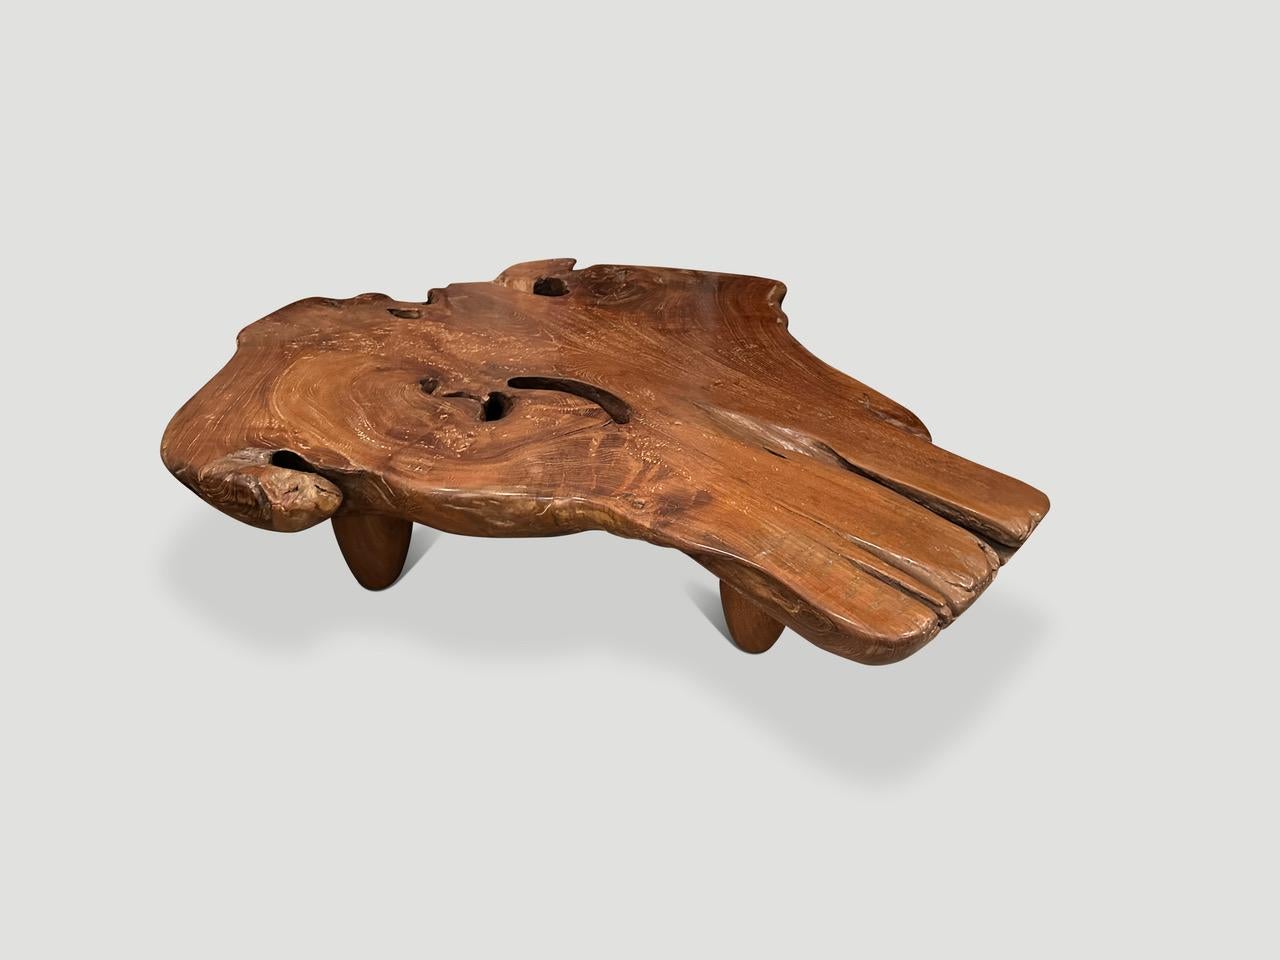 Impressive single five inch thick slab, one of a kind coffee table. We added a natural oil to this 100 year old organic shaped slab, revealing the beautiful wood grain. We then added mid century style cone legs as seen in the final image. The width